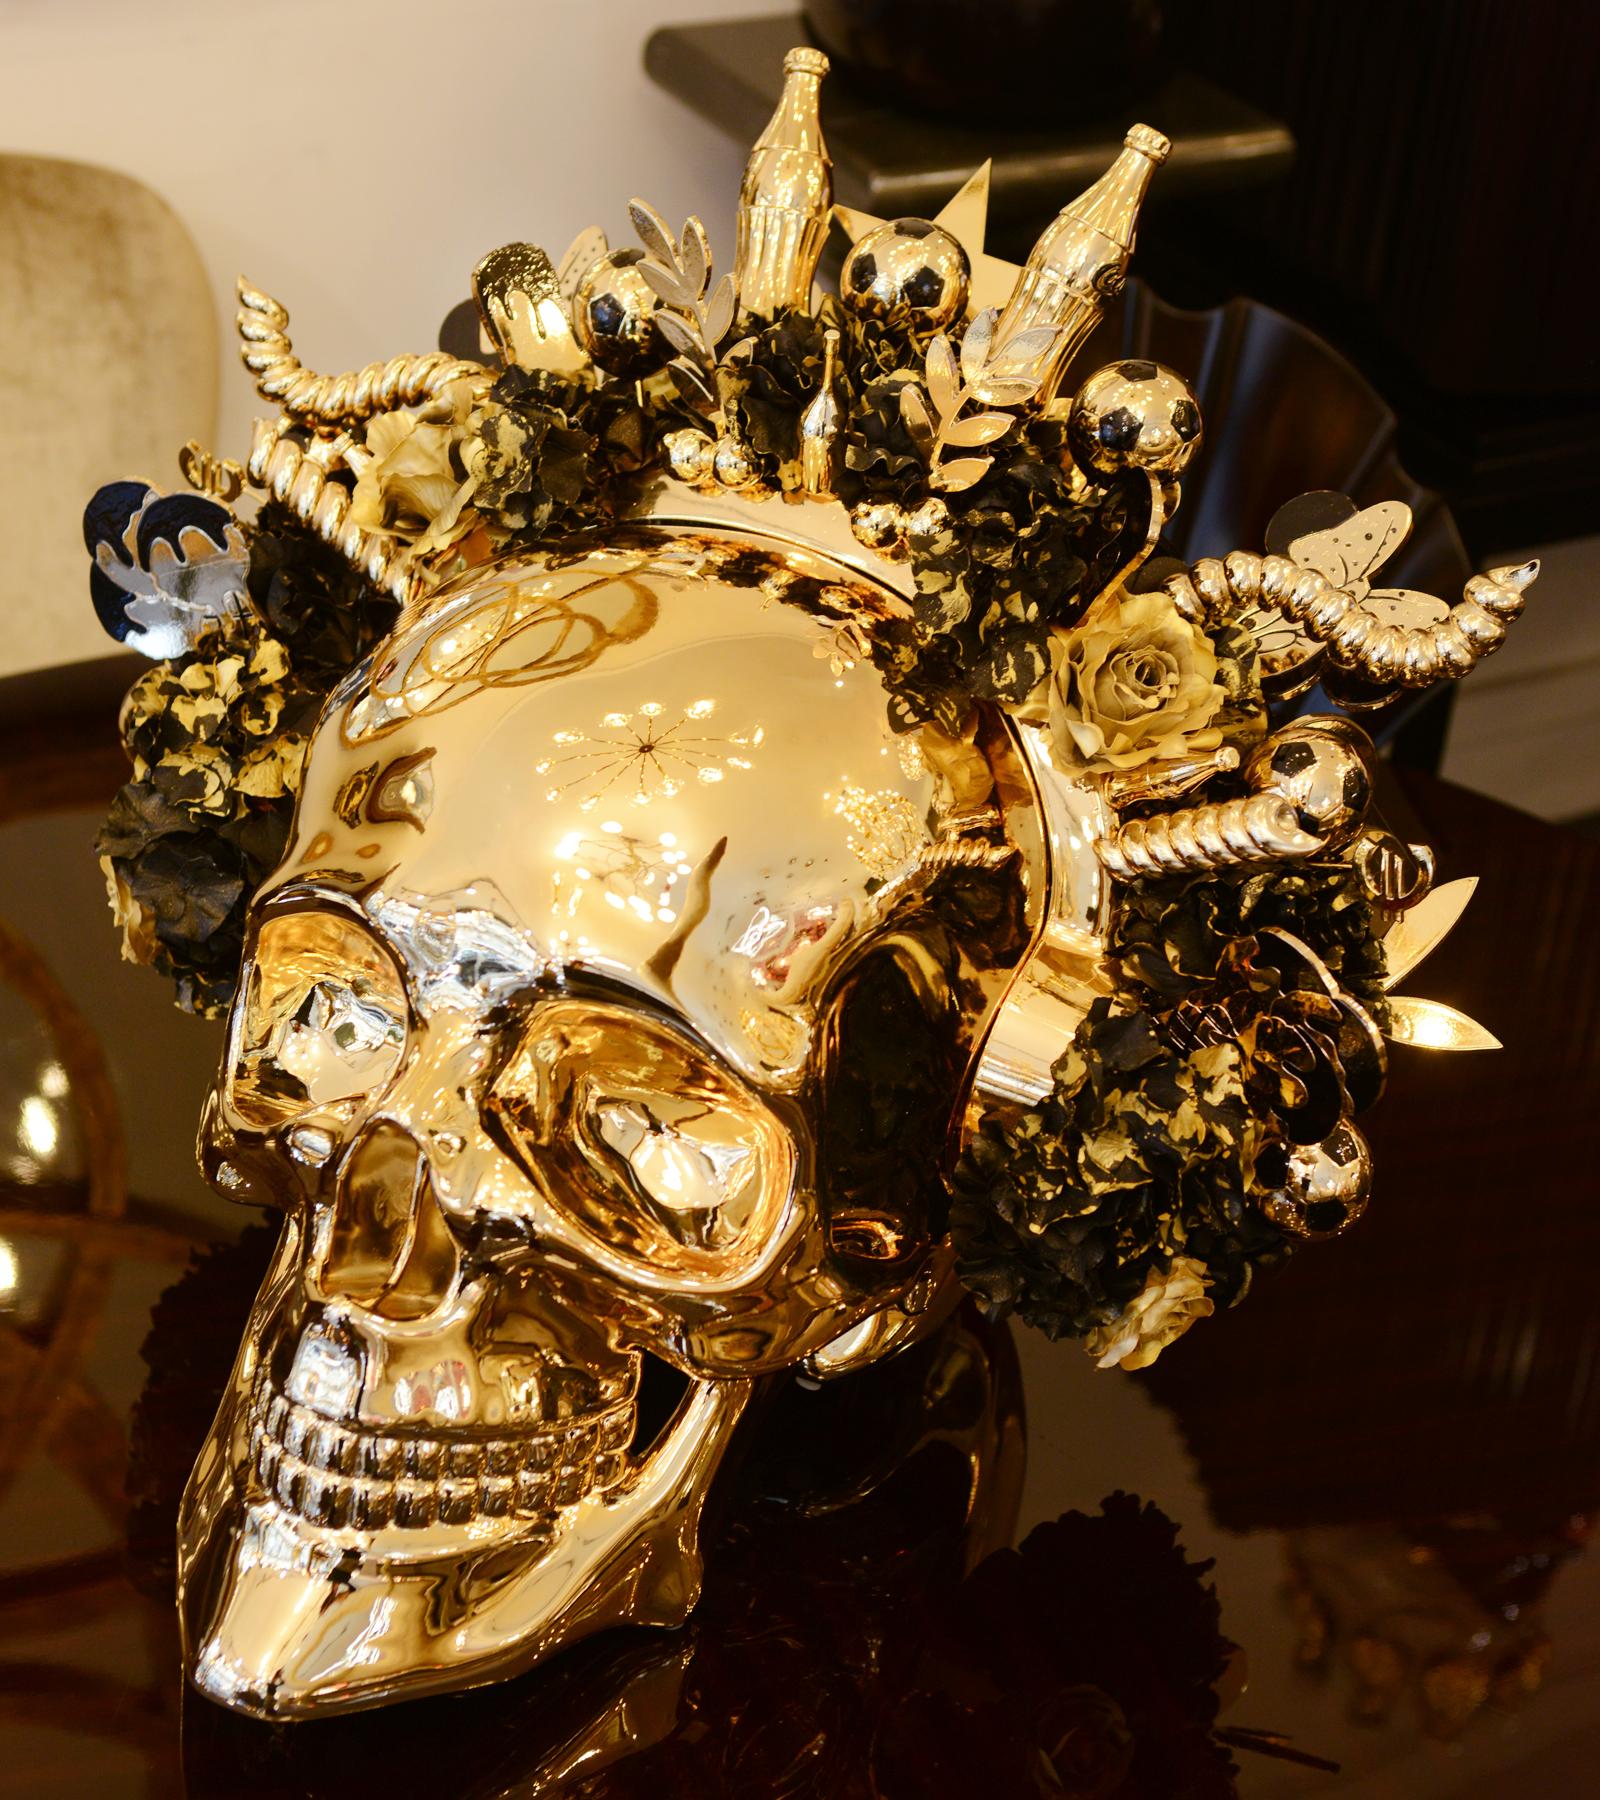 Sculpture skull golden youth. Skull made in marble
dust resin and chromed in gold finish. With head piece
decorated with different golden youth symbols. Champagne
bottle, Minnie Mouse, ice cream, flowers with gold leaf, Euros,
soccer